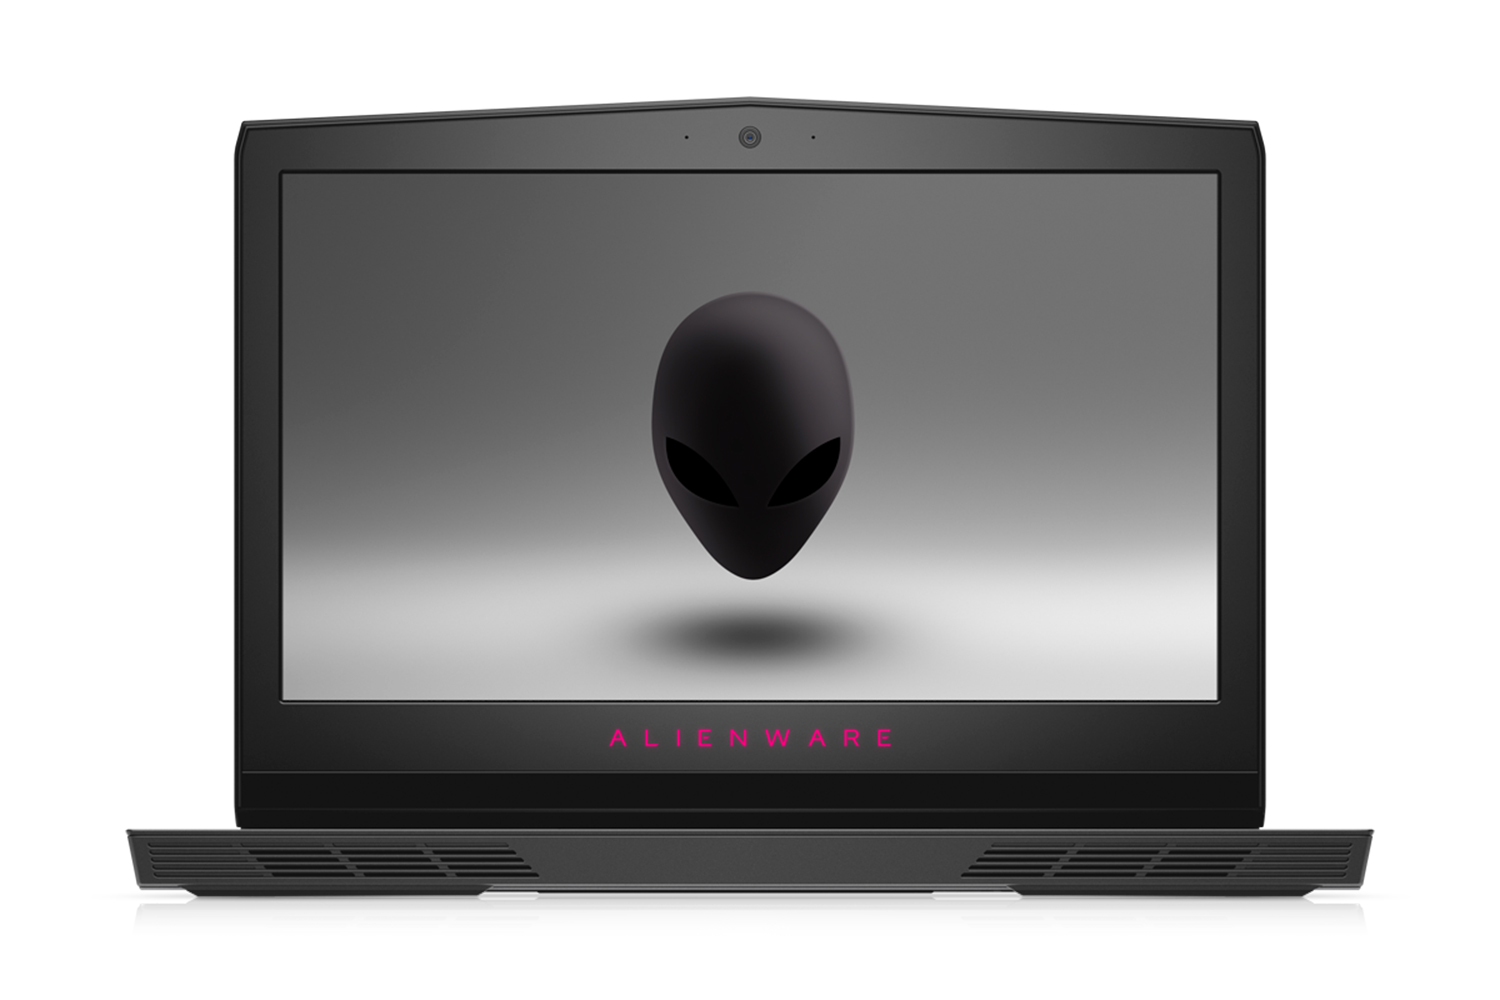 dell alienware inspiron 7000 gaming laptops refresh intel seventh gen cpu aw 17 01